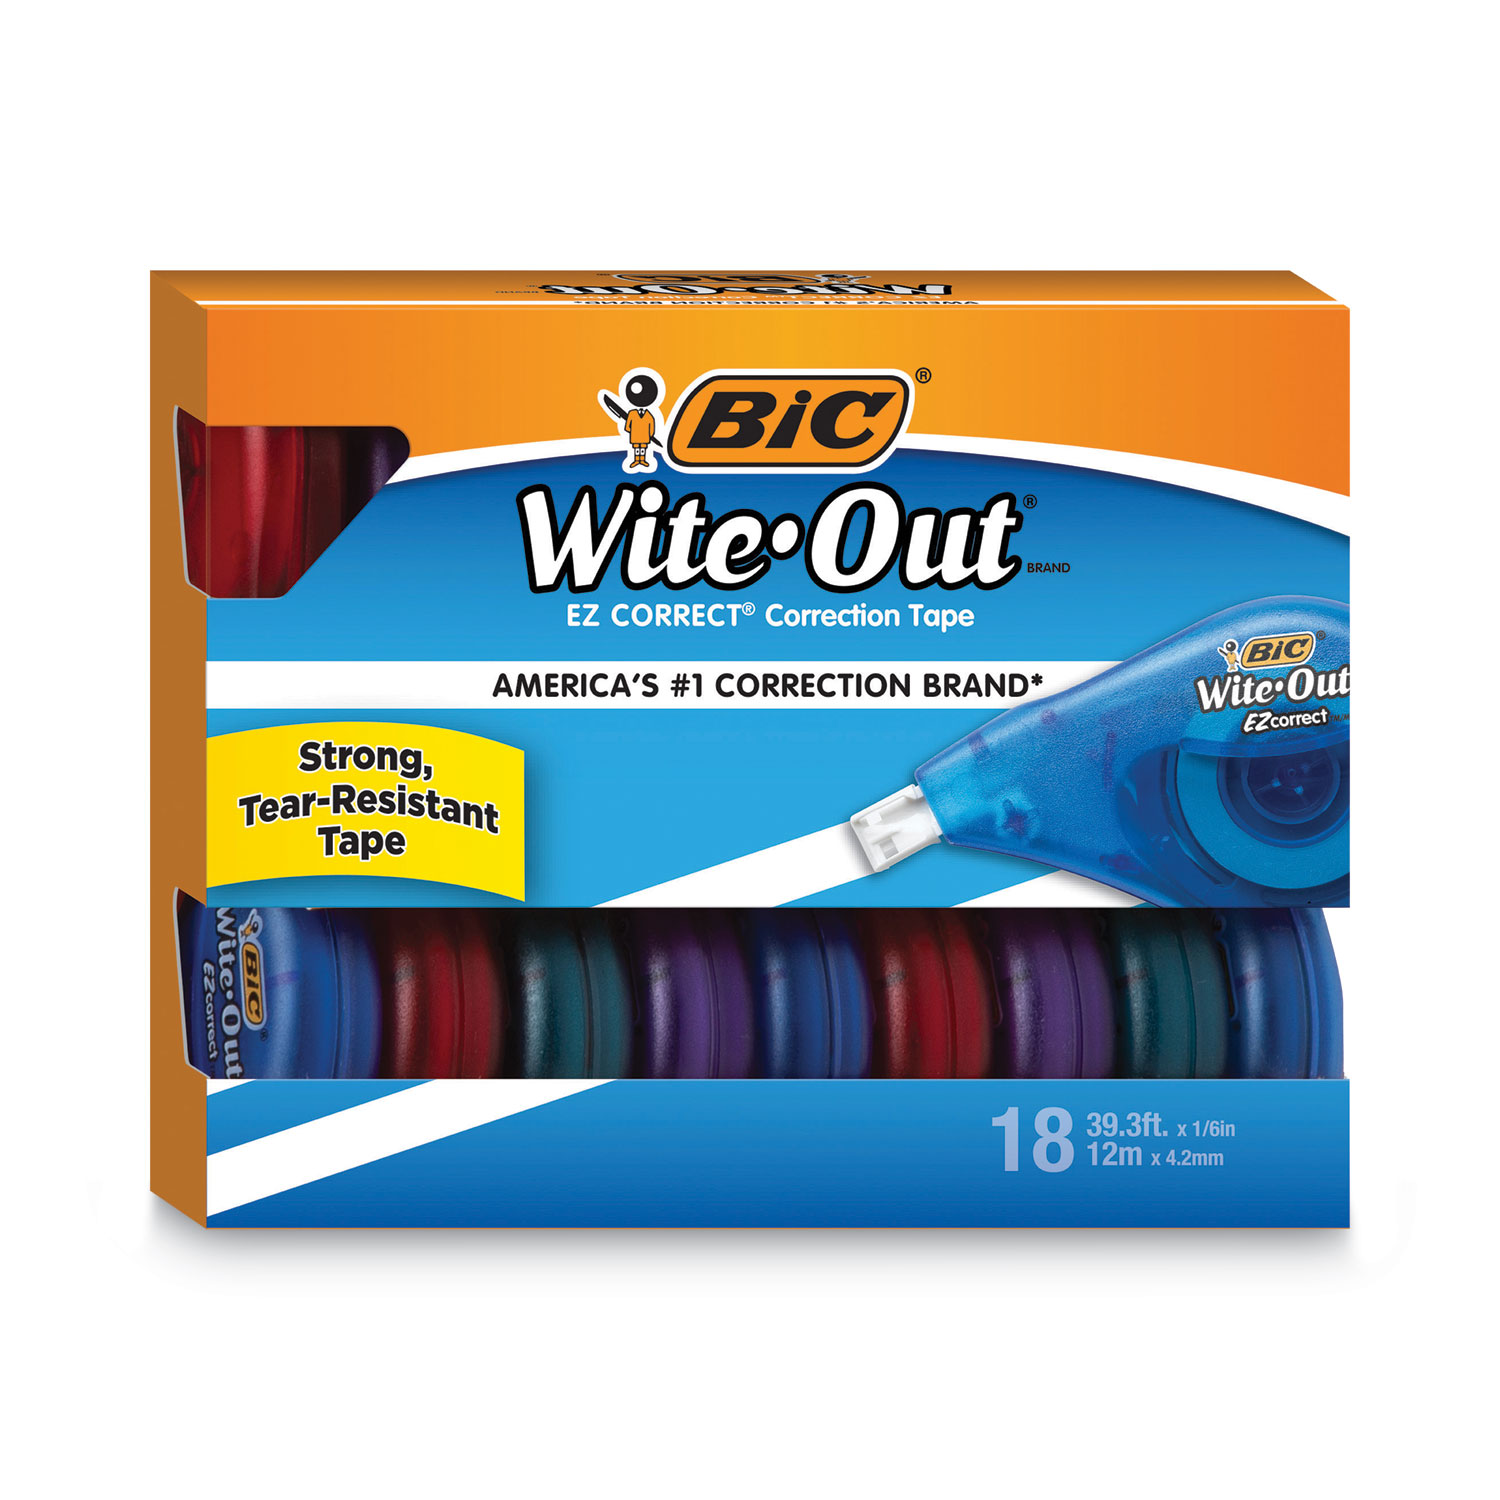 Wite-Out EZ Correct Correction Tape Value Pack, Non-Refillable